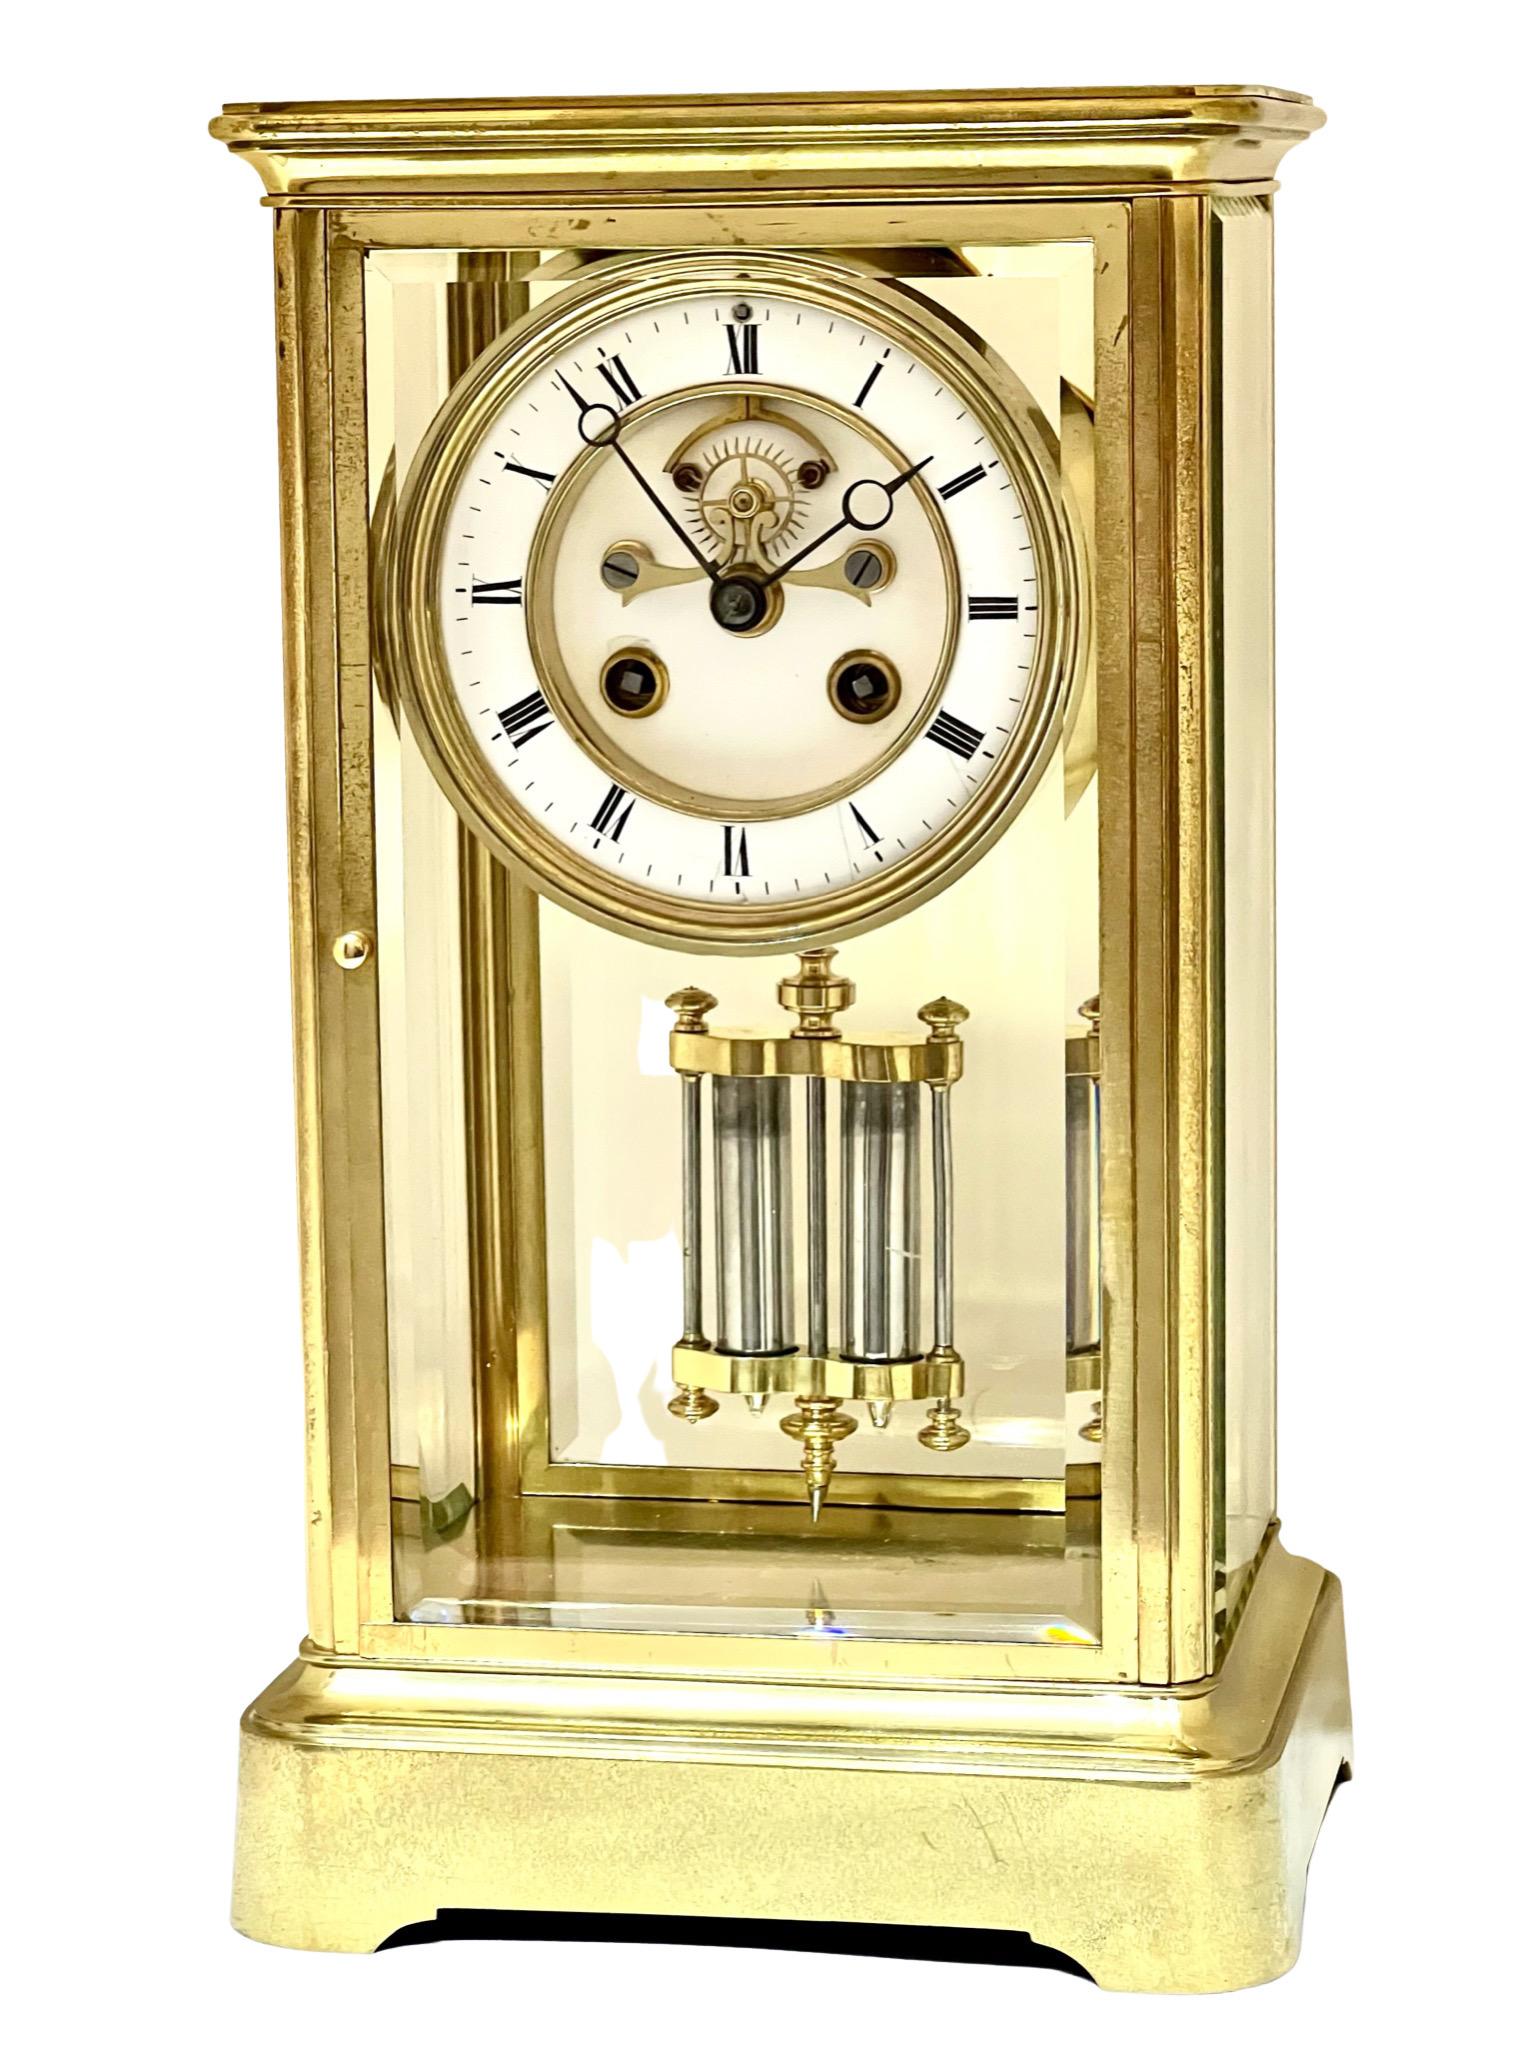 A handsome and stylish antique French brass striking four glass mantel clock. The visible Brocot escapement to the fine two piece white enamel dial is an attractive feature, as well as the twin sealed mercury jar pendulum.

It has an attractive